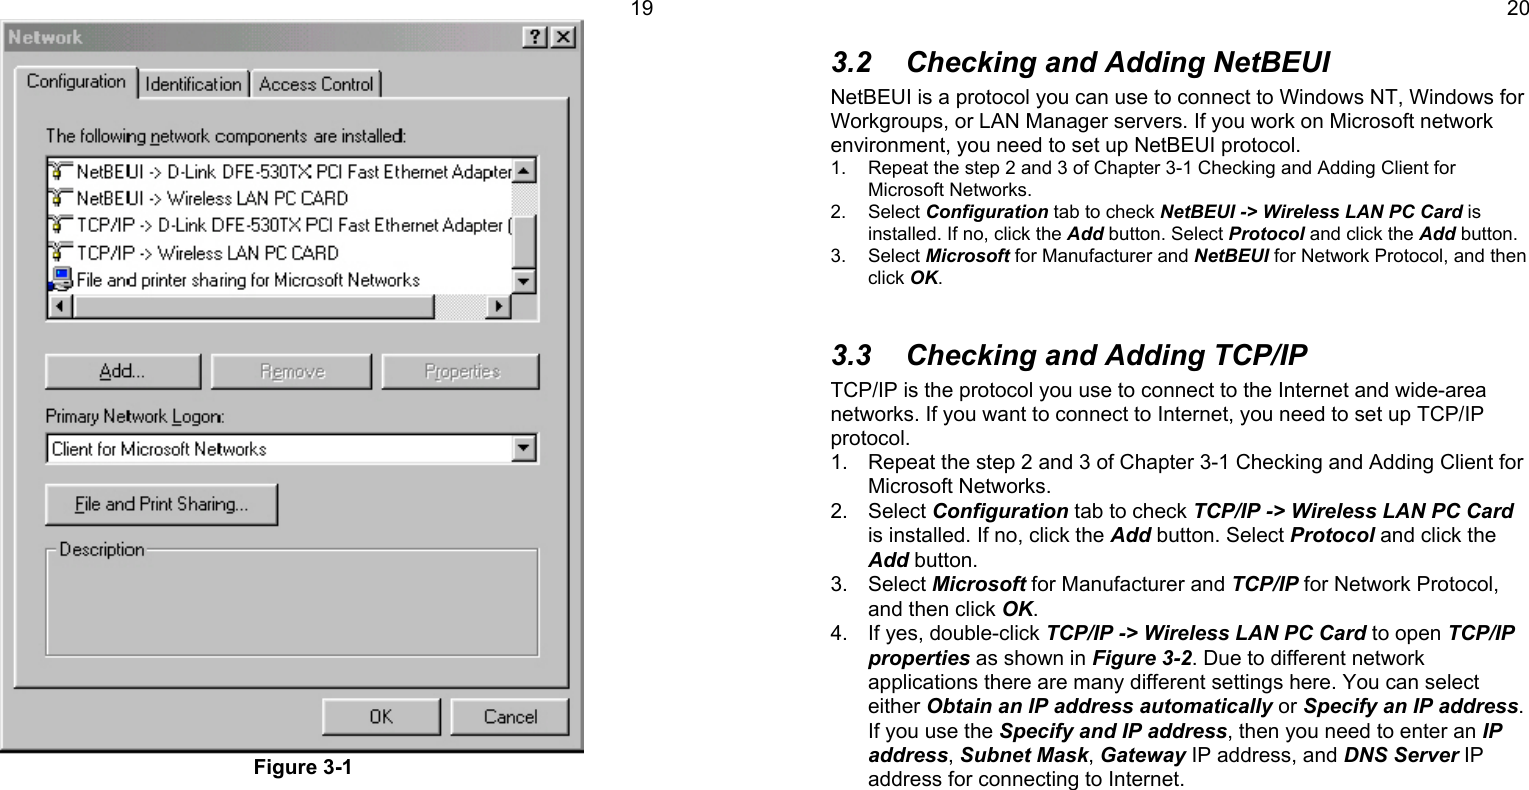 19Figure 3-1203.2  Checking and Adding NetBEUINetBEUI is a protocol you can use to connect to Windows NT, Windows forWorkgroups, or LAN Manager servers. If you work on Microsoft networkenvironment, you need to set up NetBEUI protocol.1.  Repeat the step 2 and 3 of Chapter 3-1 Checking and Adding Client forMicrosoft Networks.2. Select Configuration tab to check NetBEUI -&gt; Wireless LAN PC Card isinstalled. If no, click the Add button. Select Protocol and click the Add button.3. Select Microsoft for Manufacturer and NetBEUI for Network Protocol, and thenclick OK.3.3  Checking and Adding TCP/IPTCP/IP is the protocol you use to connect to the Internet and wide-areanetworks. If you want to connect to Internet, you need to set up TCP/IPprotocol.1.  Repeat the step 2 and 3 of Chapter 3-1 Checking and Adding Client forMicrosoft Networks.2. Select Configuration tab to check TCP/IP -&gt; Wireless LAN PC Cardis installed. If no, click the Add button. Select Protocol and click theAdd button.3. Select Microsoft for Manufacturer and TCP/IP for Network Protocol,and then click OK.4.  If yes, double-click TCP/IP -&gt; Wireless LAN PC Card to open TCP/IPproperties as shown in Figure 3-2. Due to different networkapplications there are many different settings here. You can selecteither Obtain an IP address automatically or Specify an IP address.If you use the Specify and IP address, then you need to enter an IPaddress, Subnet Mask, Gateway IP address, and DNS Server IPaddress for connecting to Internet.